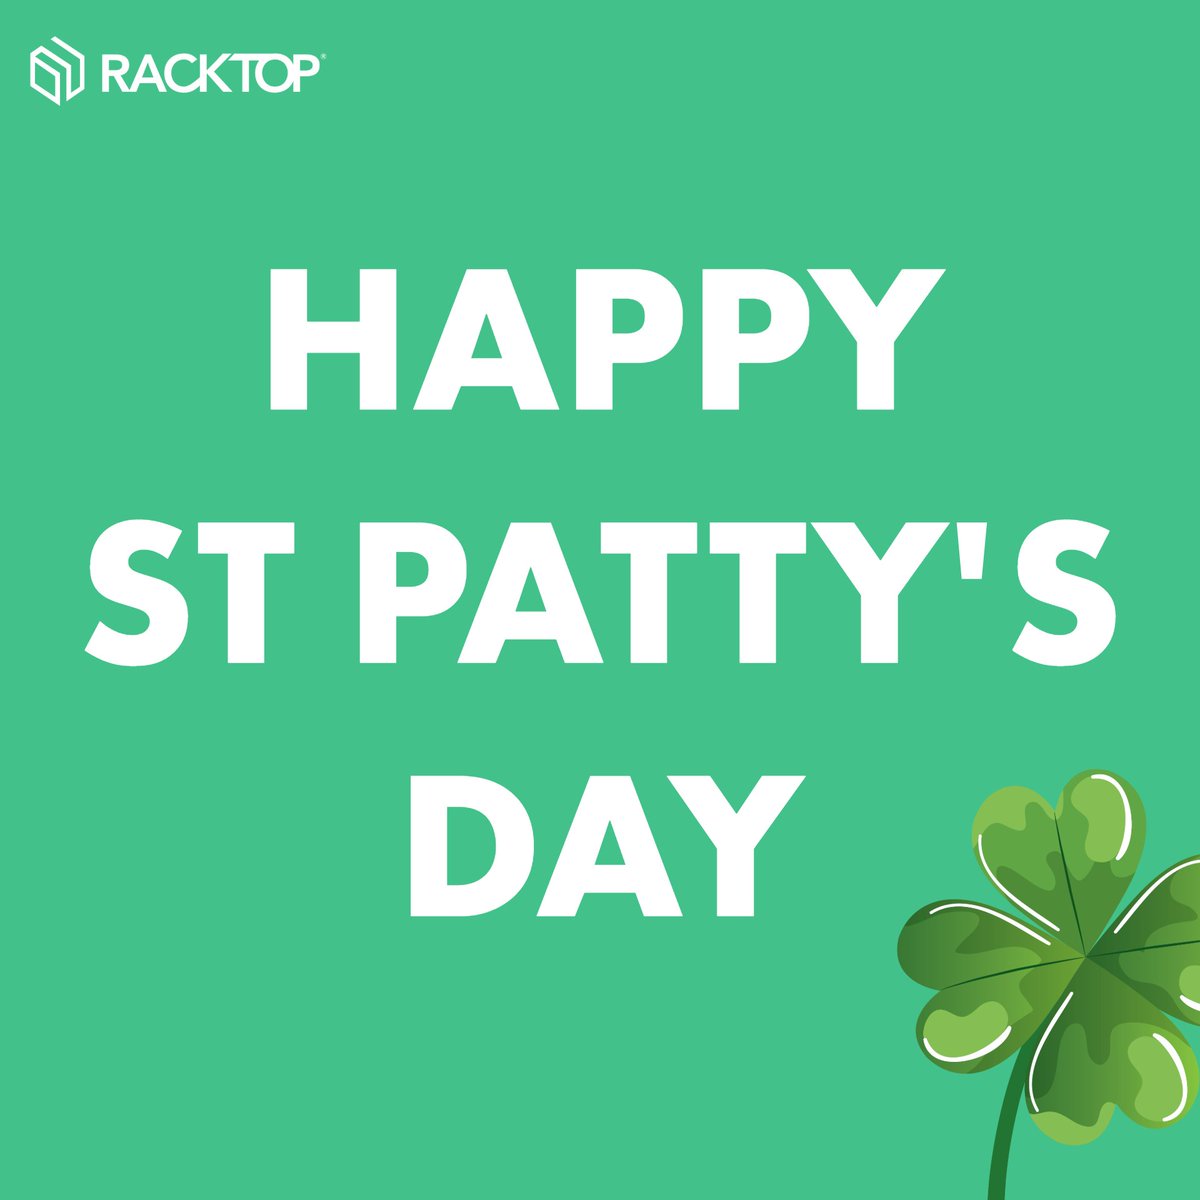 Here's some festive facts and figures: -Taylor Swift's lucky number is 13 -About 13 million pints of Guinness are served on St. Patty's Day -13 x 2 = 26 -Roughly 26 billion records were leaked in what is dubbed the 'mother of all breaches' in early 2024 hubs.li/Q02pDpWV0